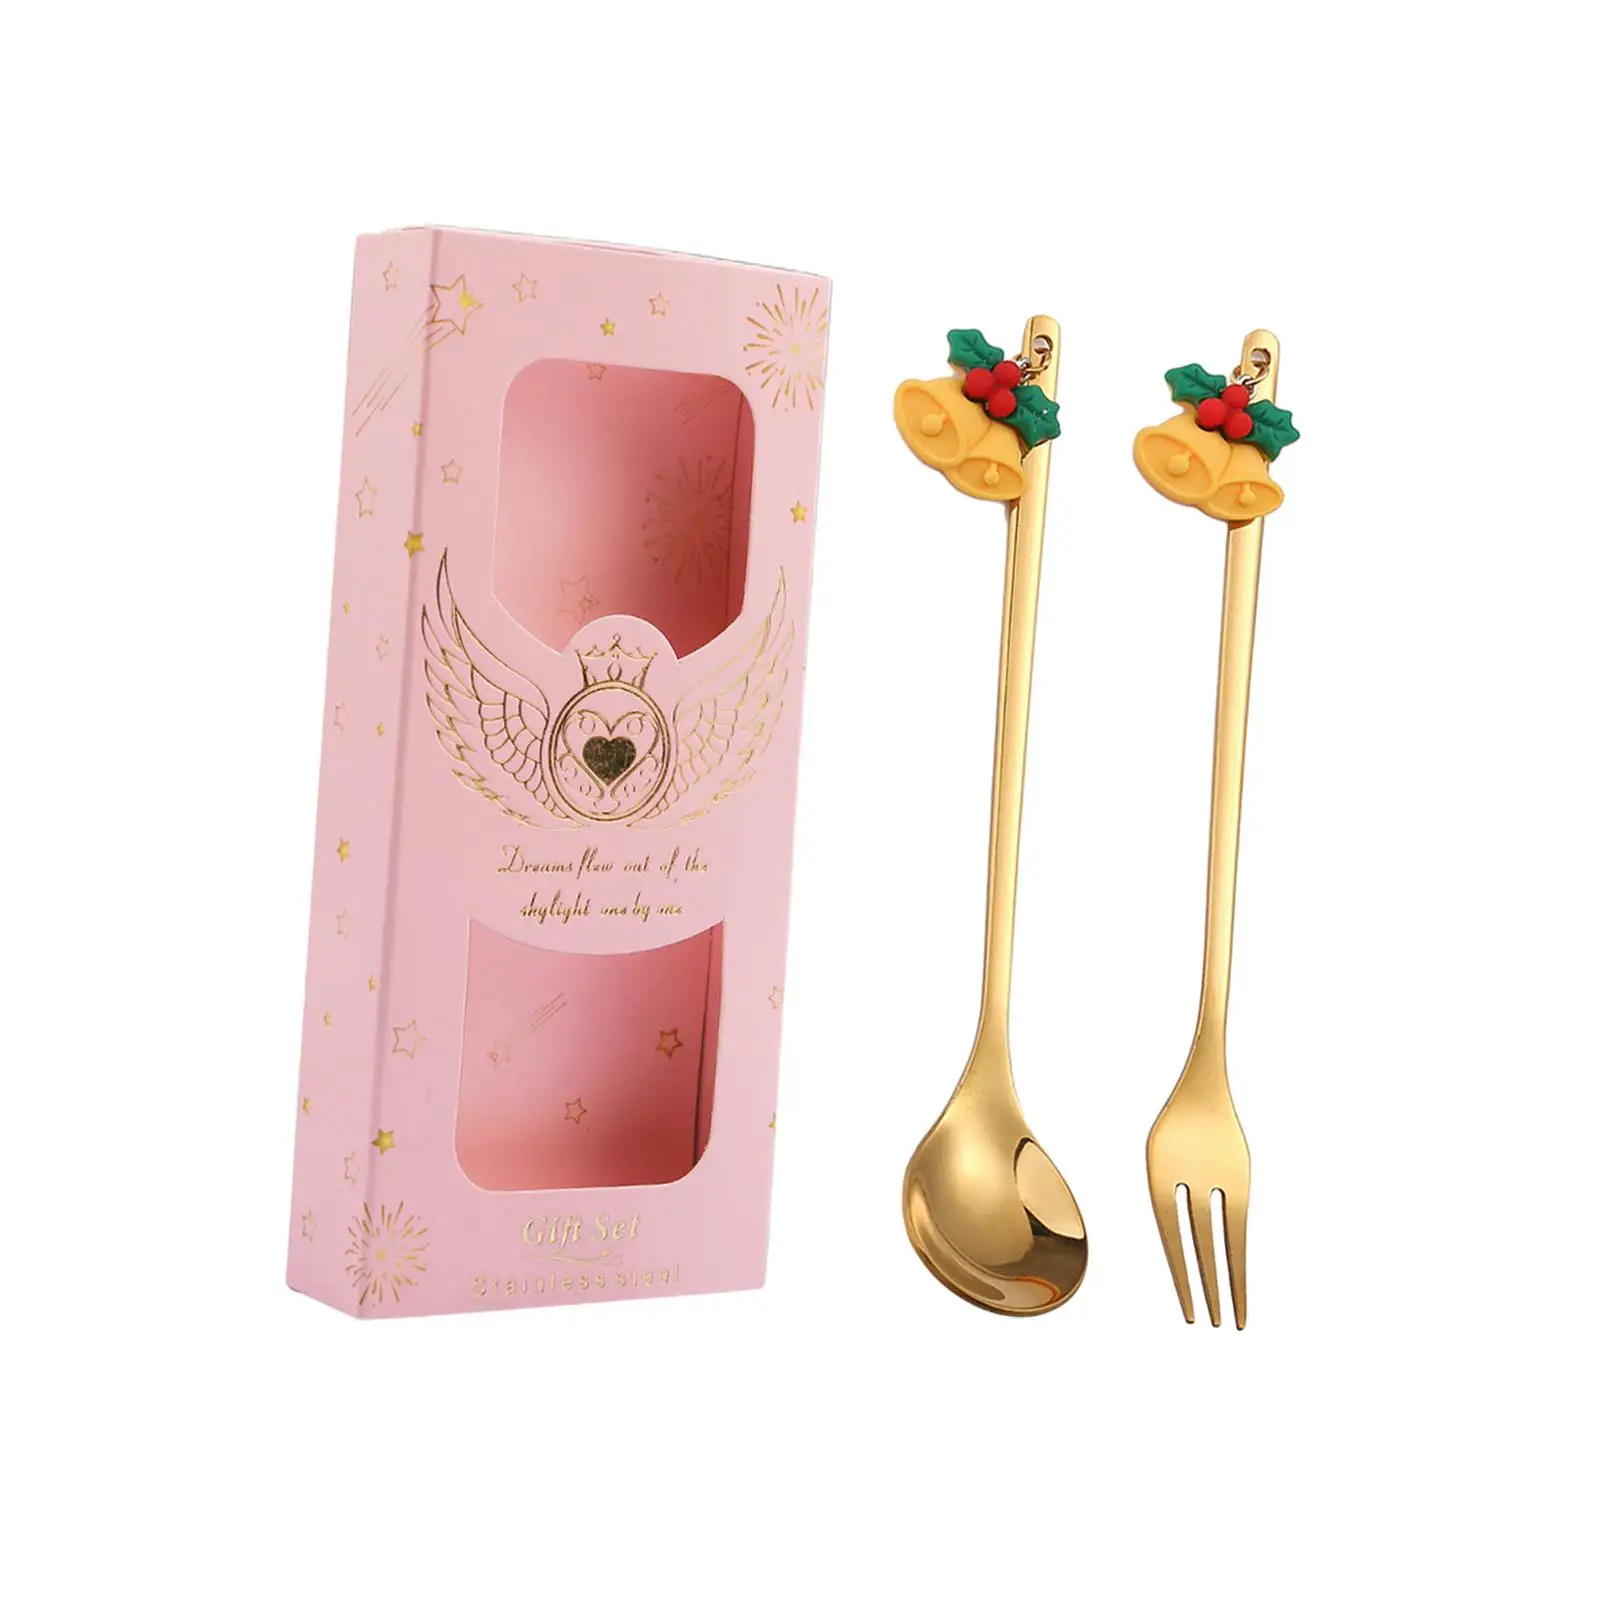 Christmas Spoon and Fork Set Small Coffee Spoon Utensils Reusable with Gift Box Cutlery for Restaurant Party Gift Present